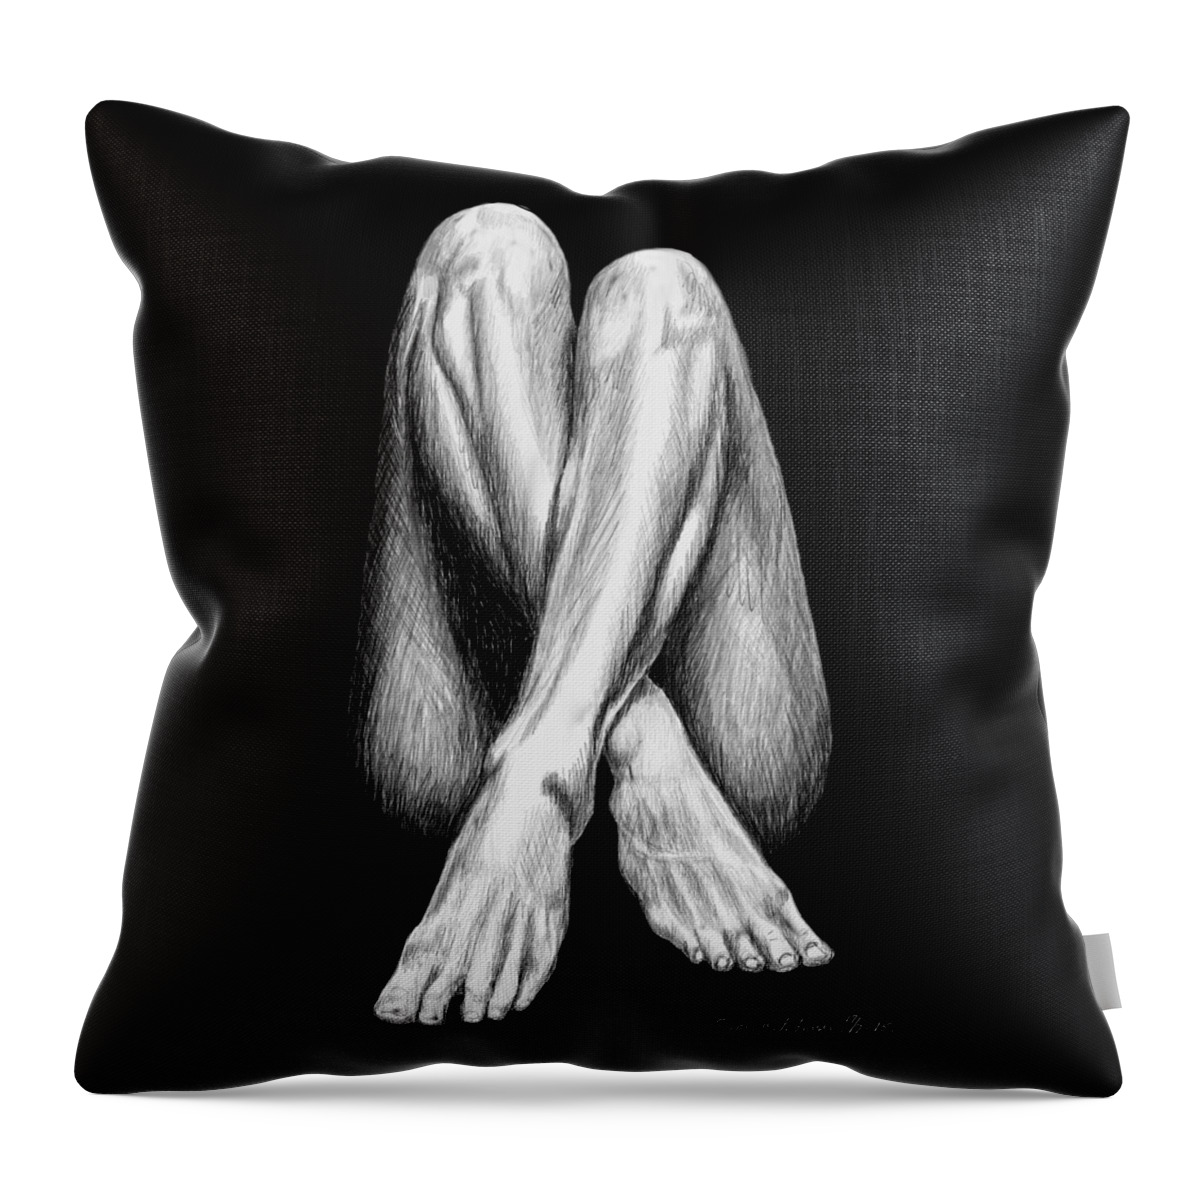 Sketch Throw Pillow featuring the digital art Legs by ThomasE Jensen